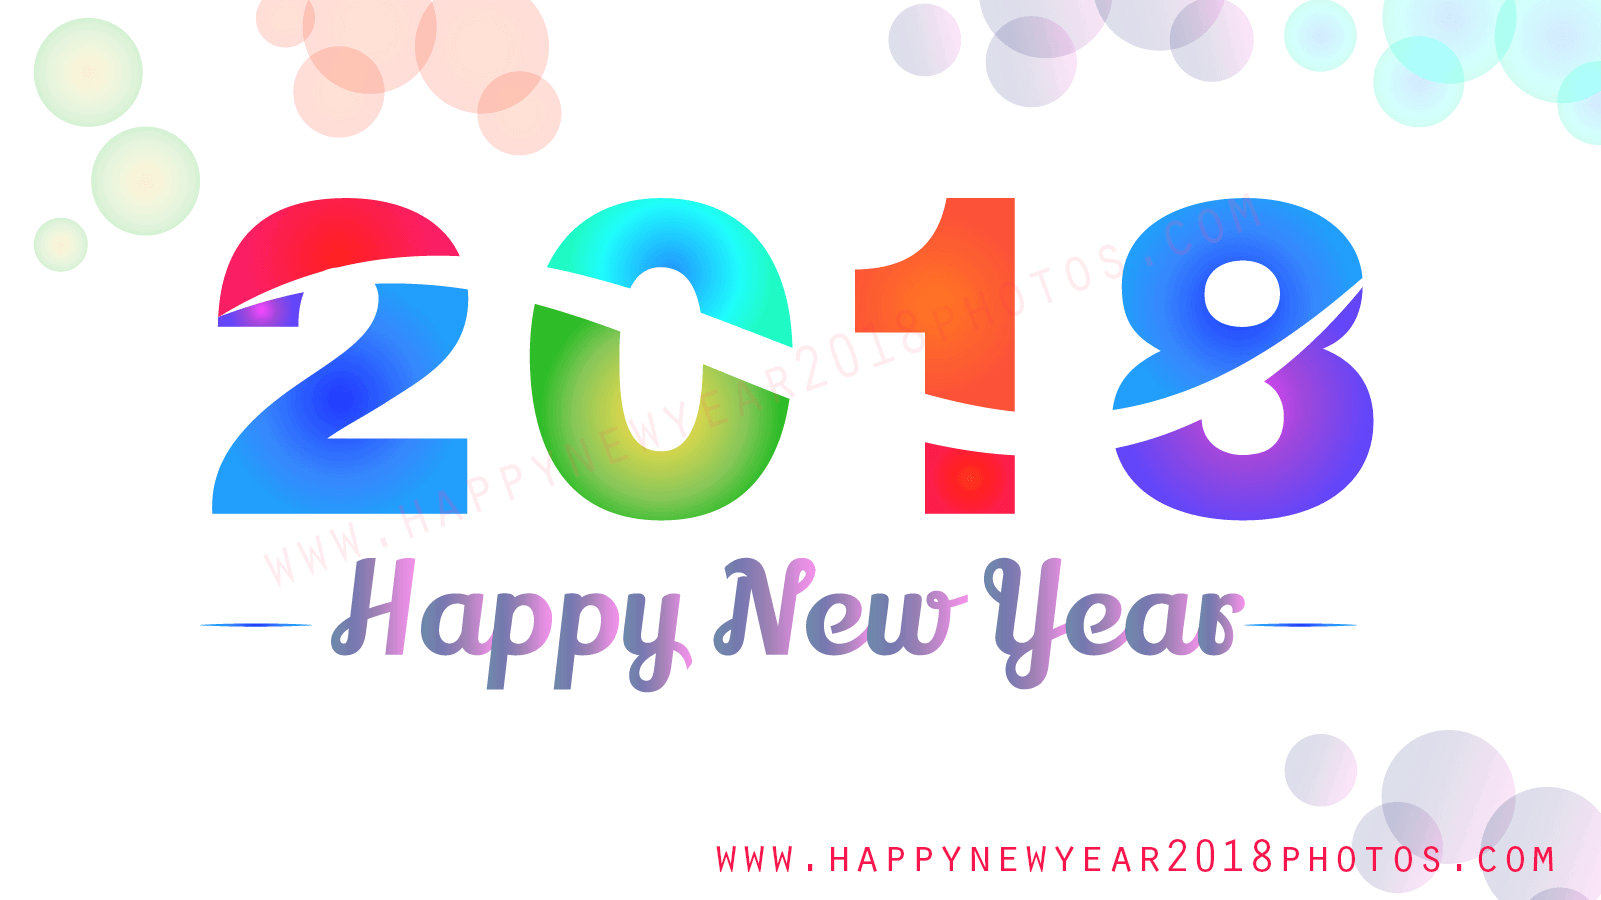 Happy New Year 2018 Png - HD Wallpaper 